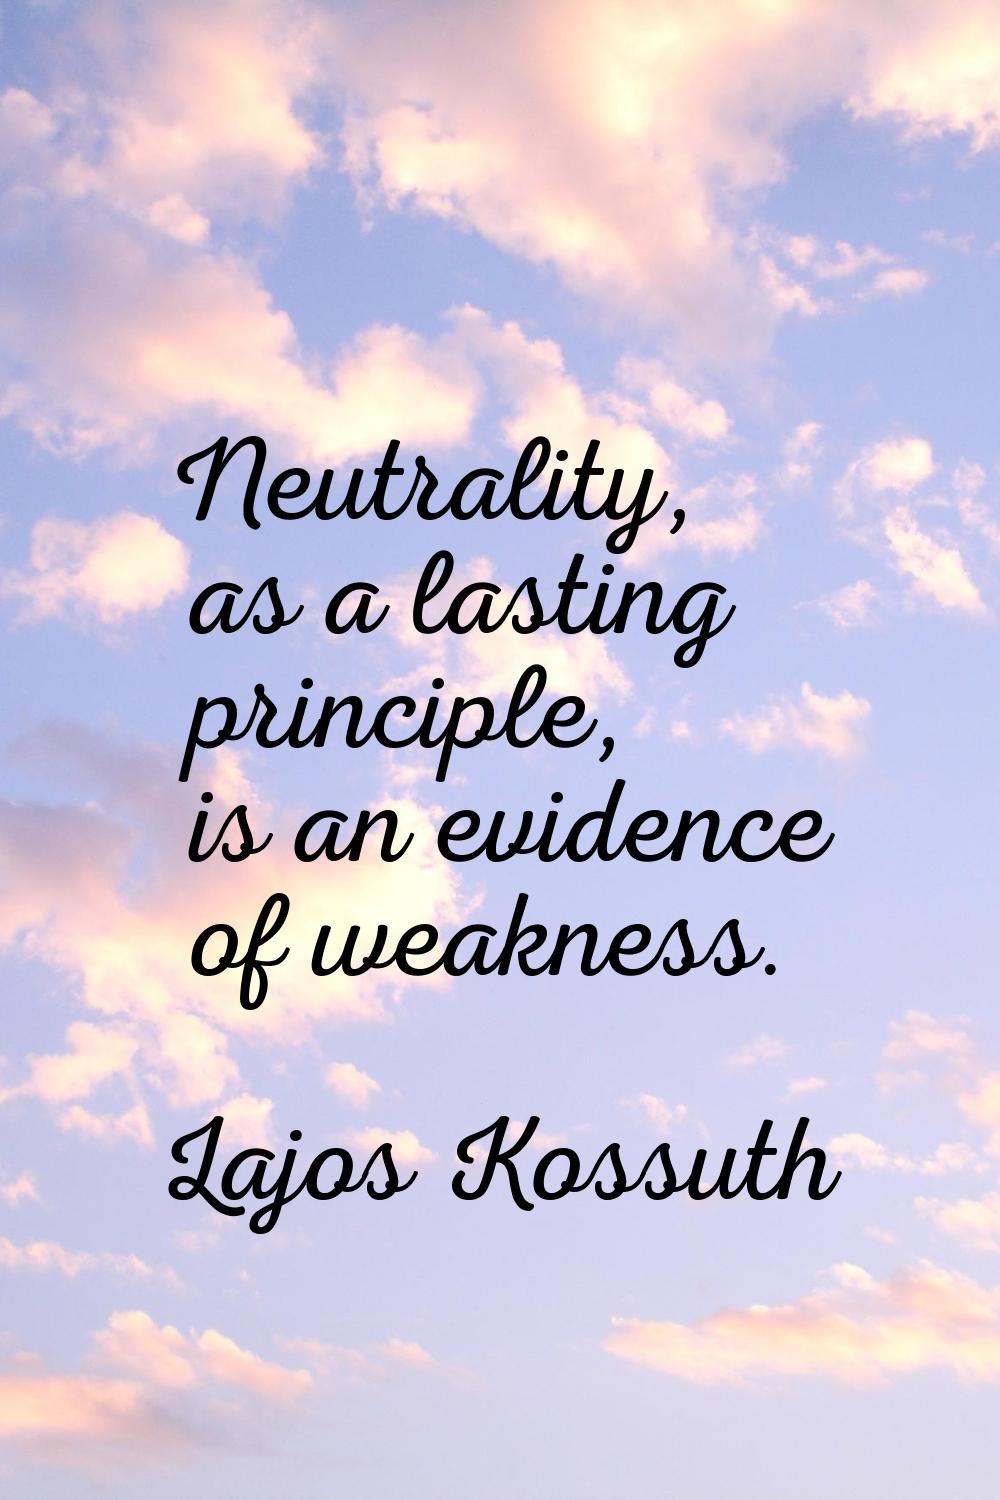 Neutrality, as a lasting principle, is an evidence of weakness.